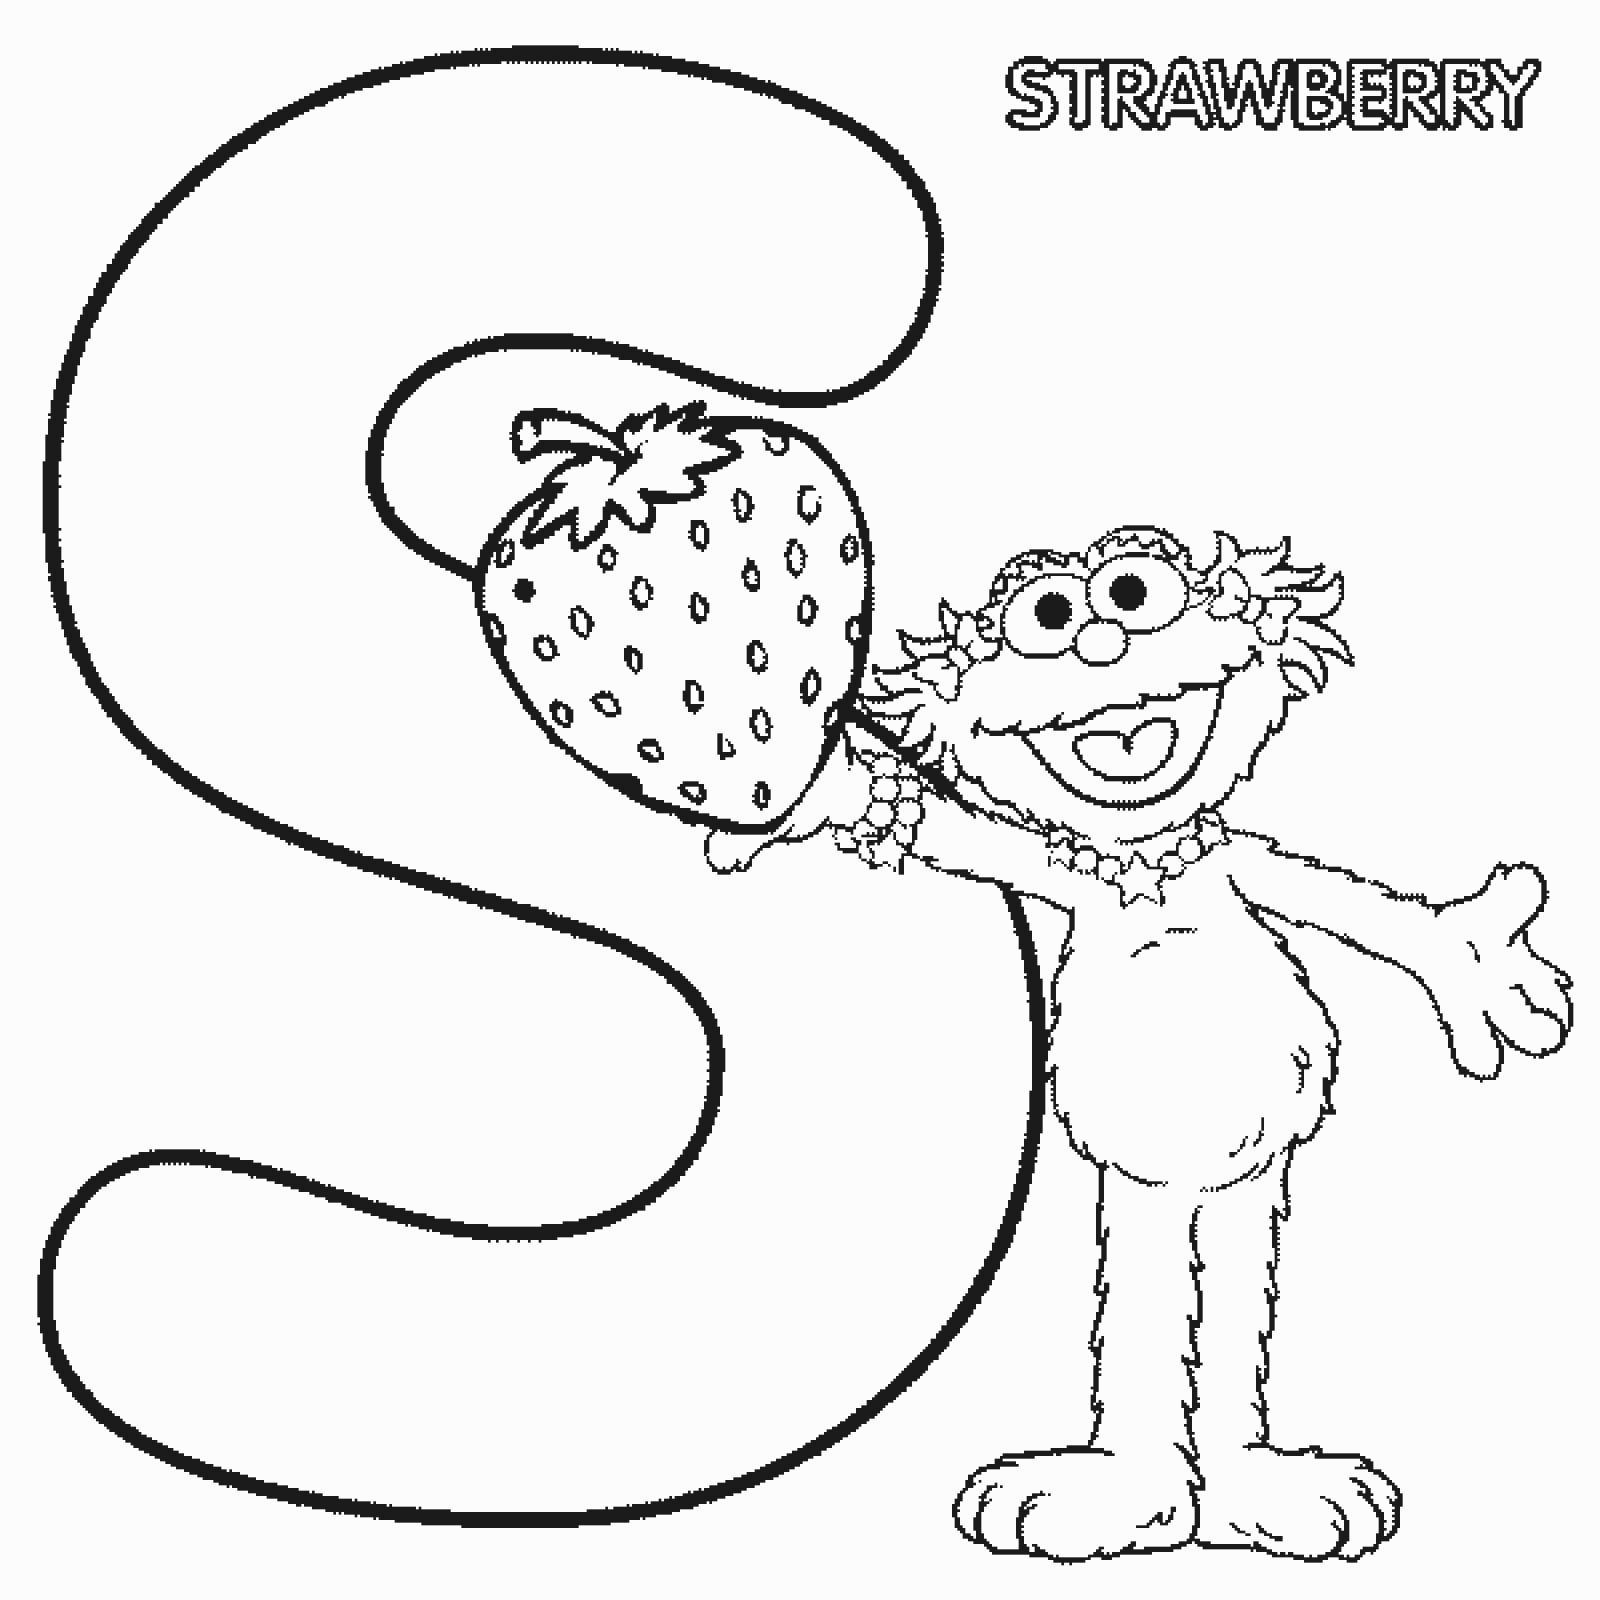 Letter S Coloring Page | Coloring Pages for Kids and for Adults